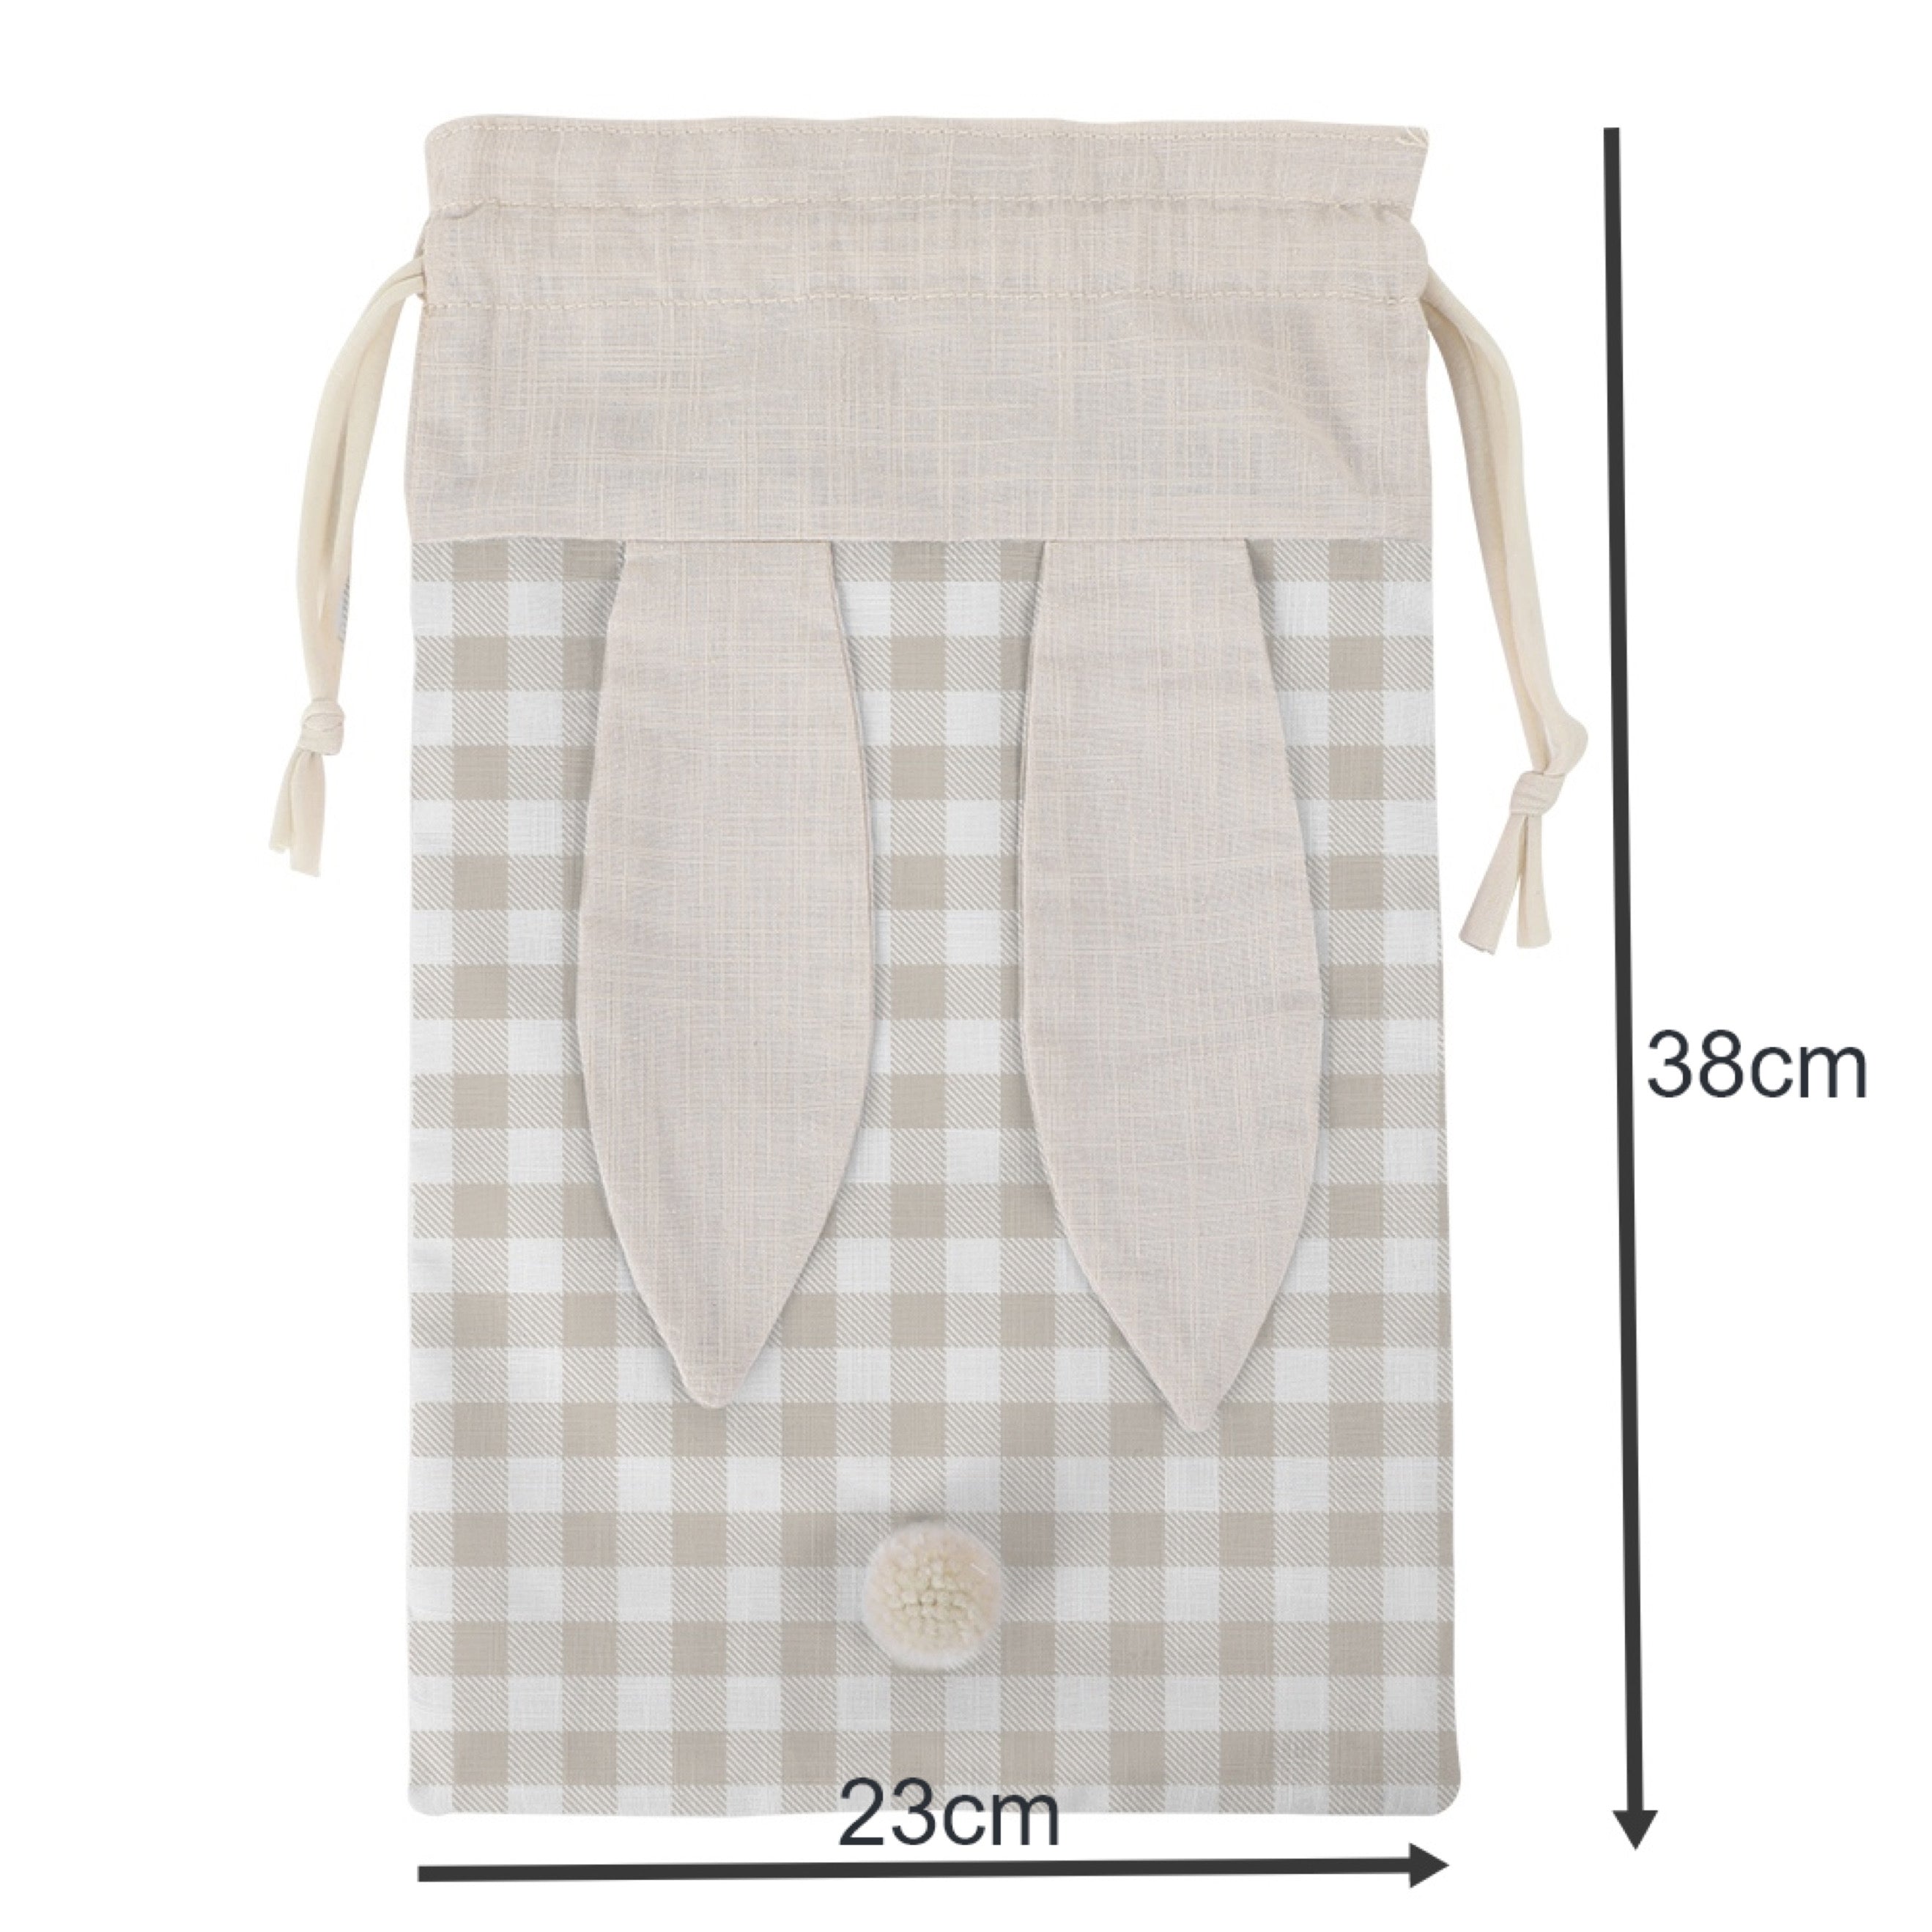 Gingham Easter Bag - Arrives Feburary - Only The Sweet Stuff